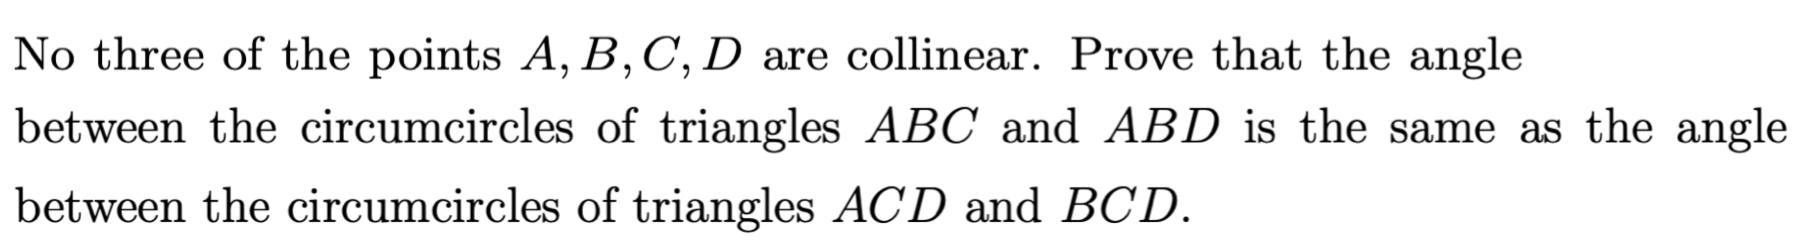 No three of the points A, B, C, D are collinear. Prove that the angle
between the circumcircles of triangles ABC and ABD is the same as the angle
between the circumcircles of triangles ACD and BCD.
